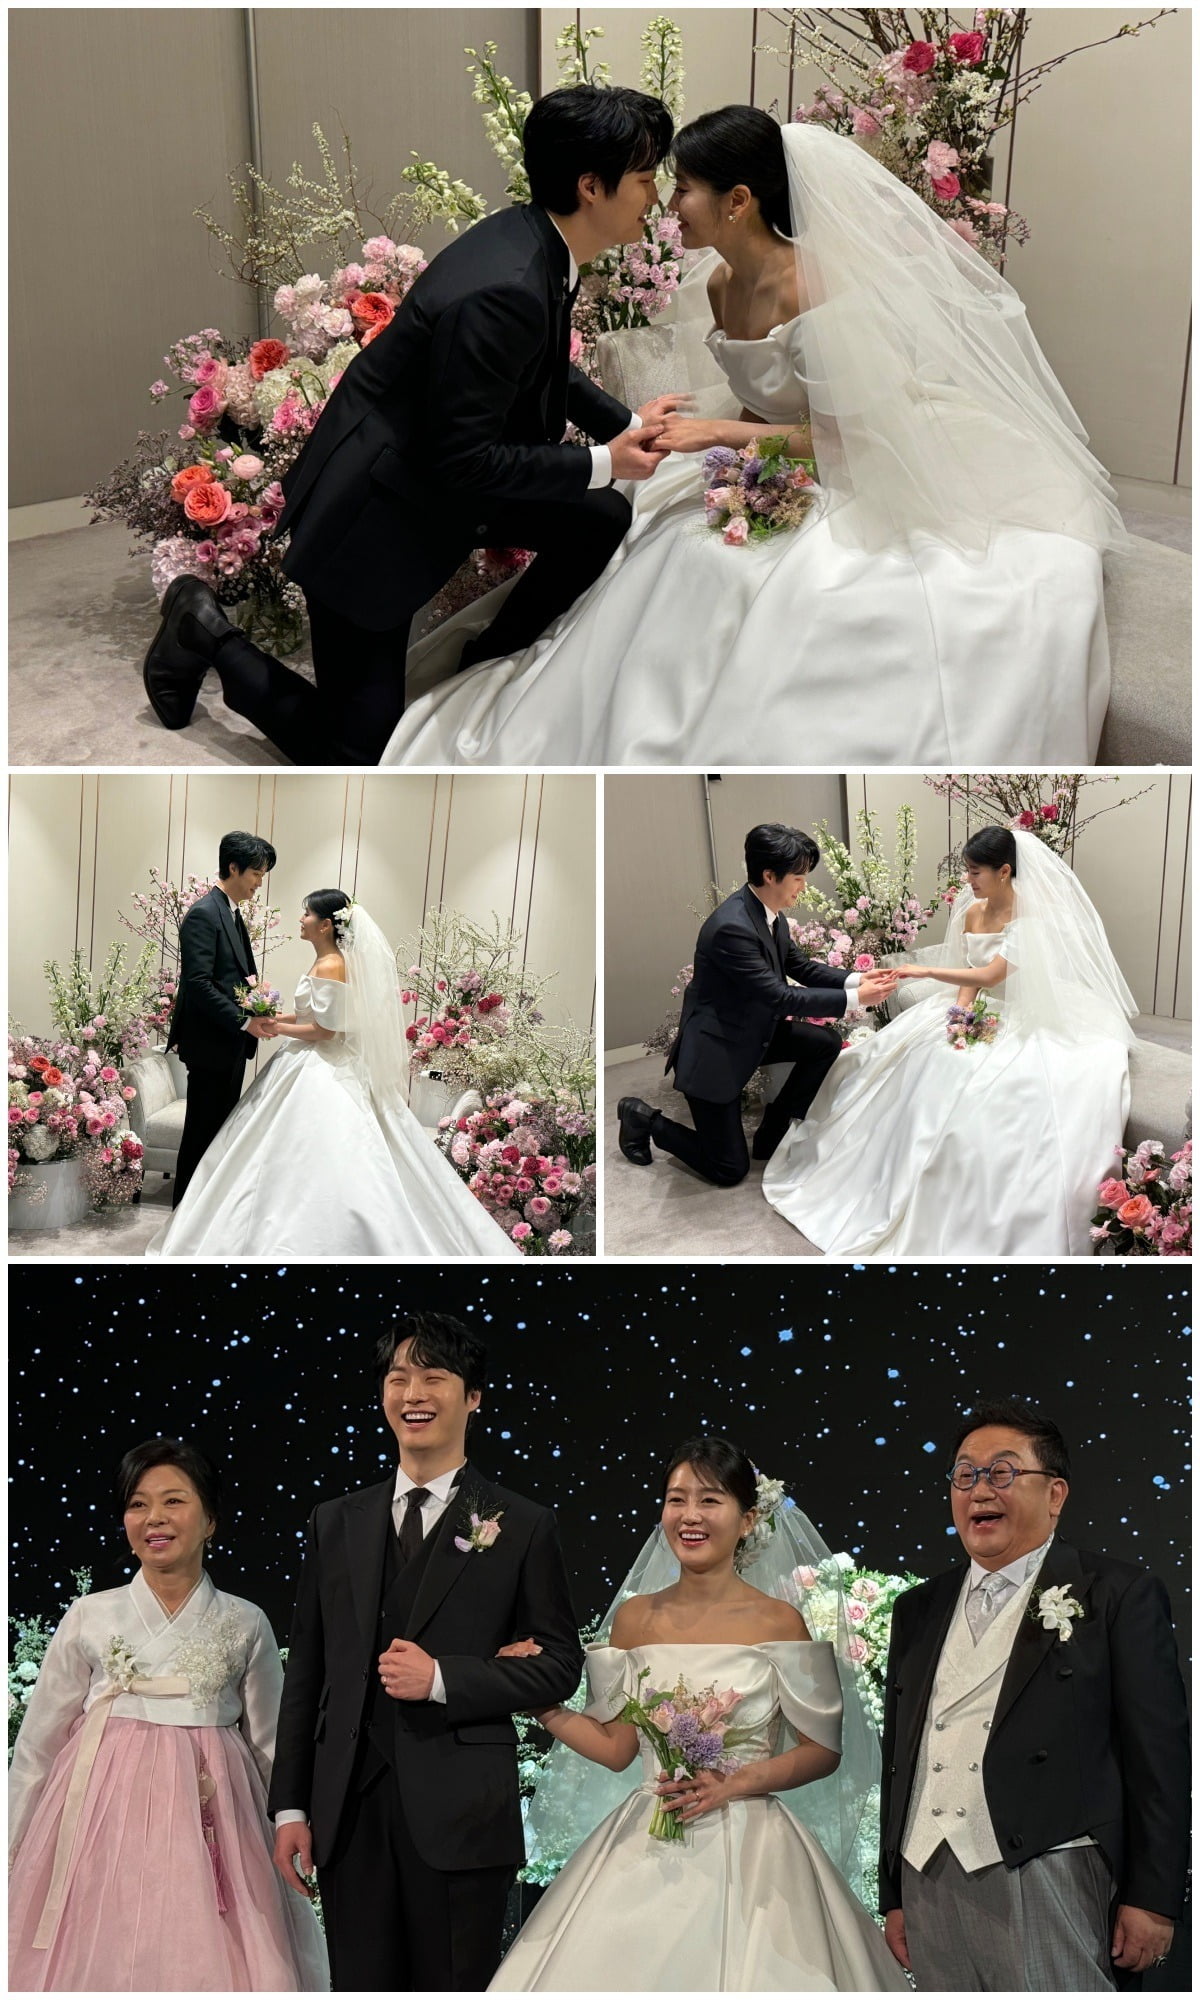 Photos from Lee Soo-min and Won Hyeok's wedding were revealed